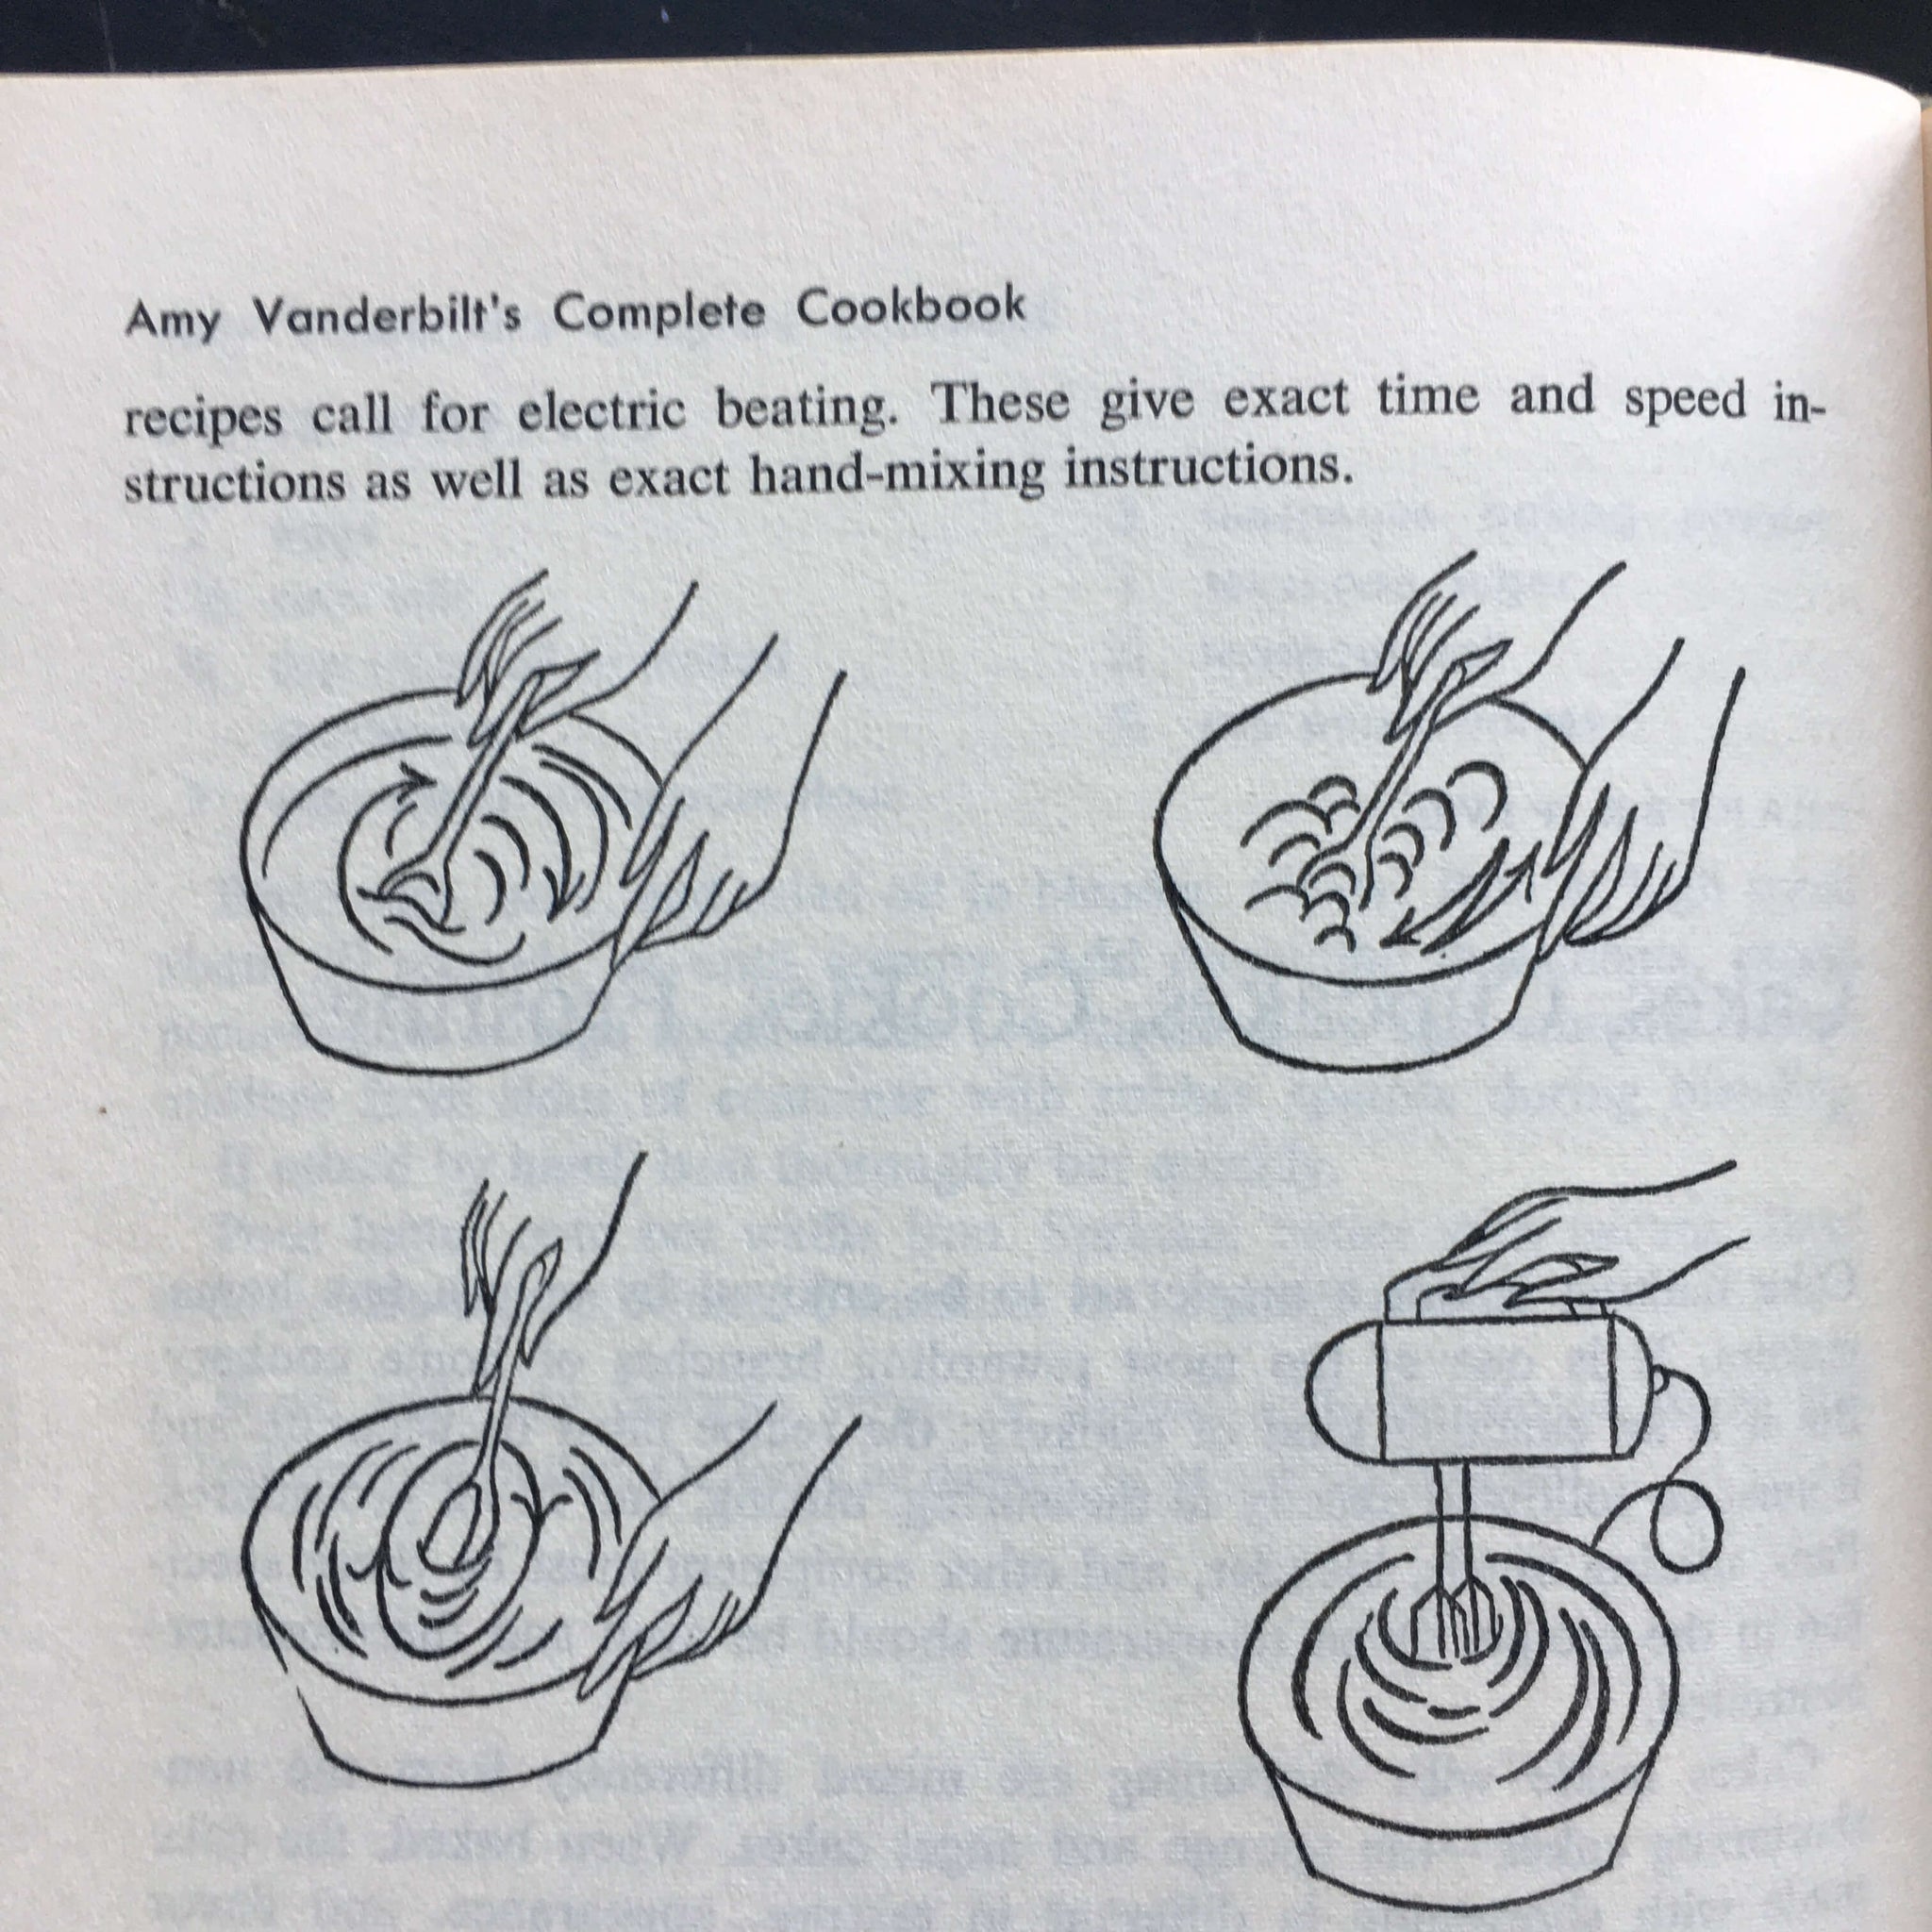 Amy Vanderbilt's Complete Cookbook - 1961 Edition - Drawings by Andy Warhol